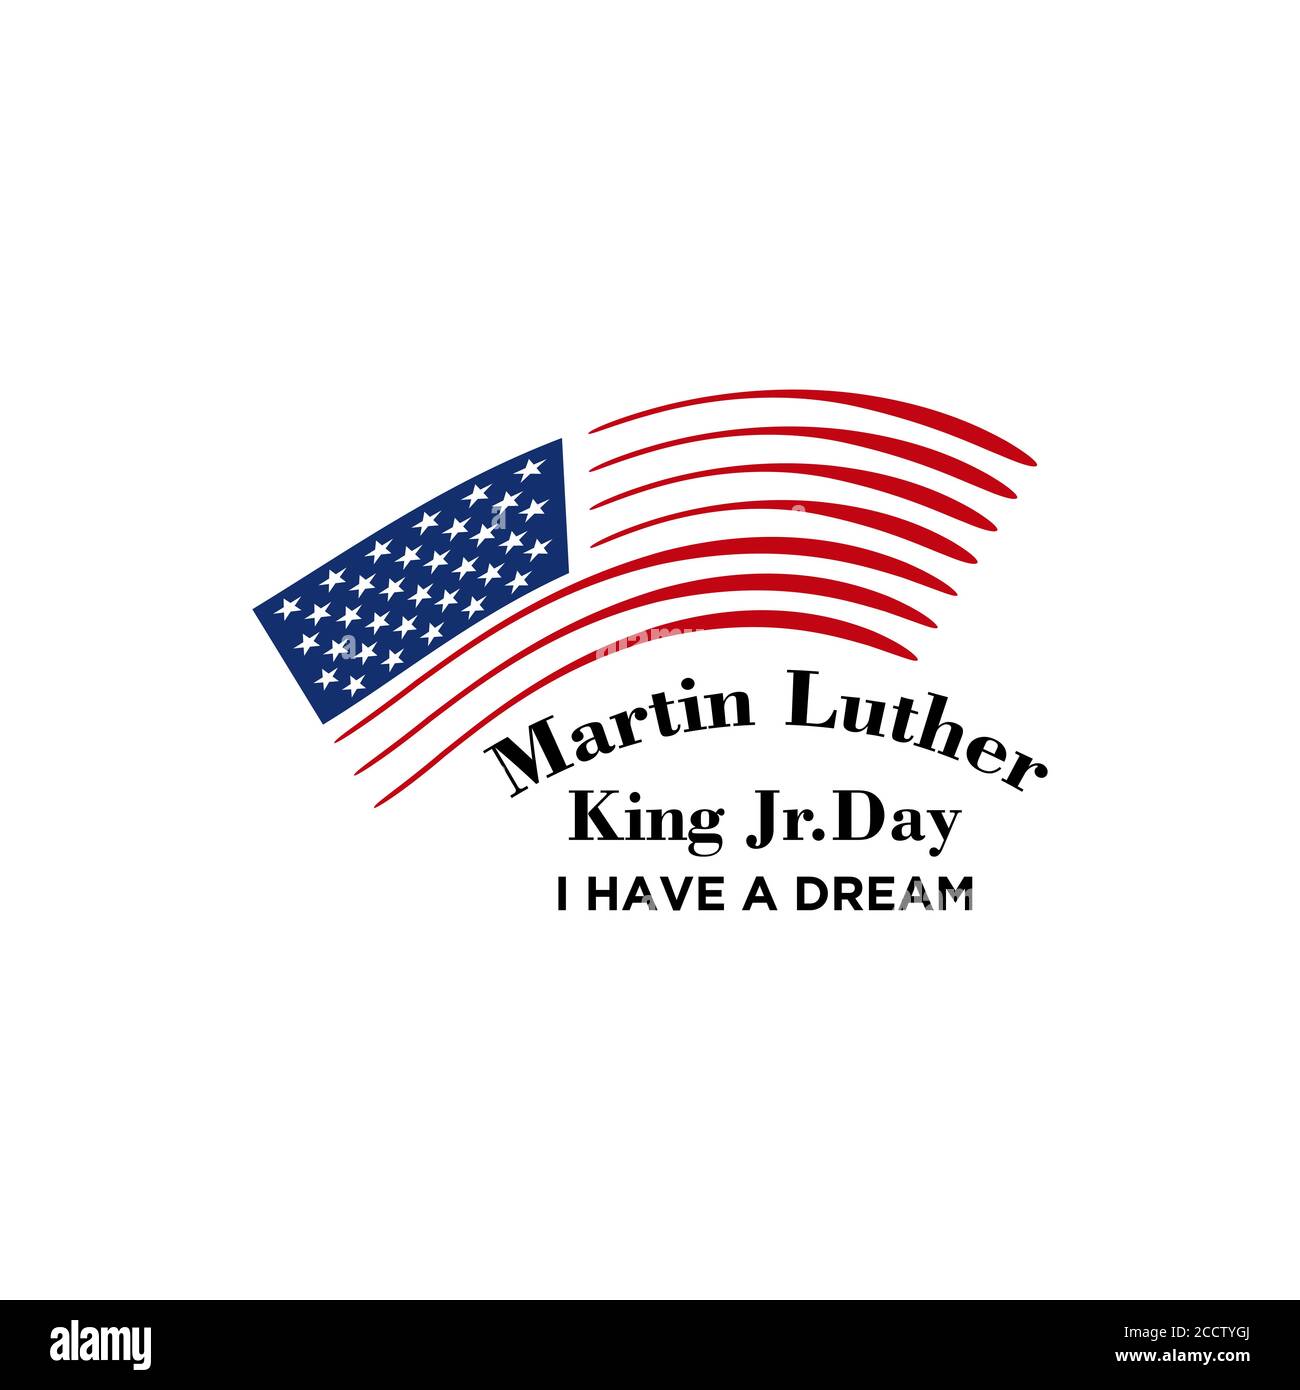 martin luther king day banner layout design, vector illustration Stock Vector